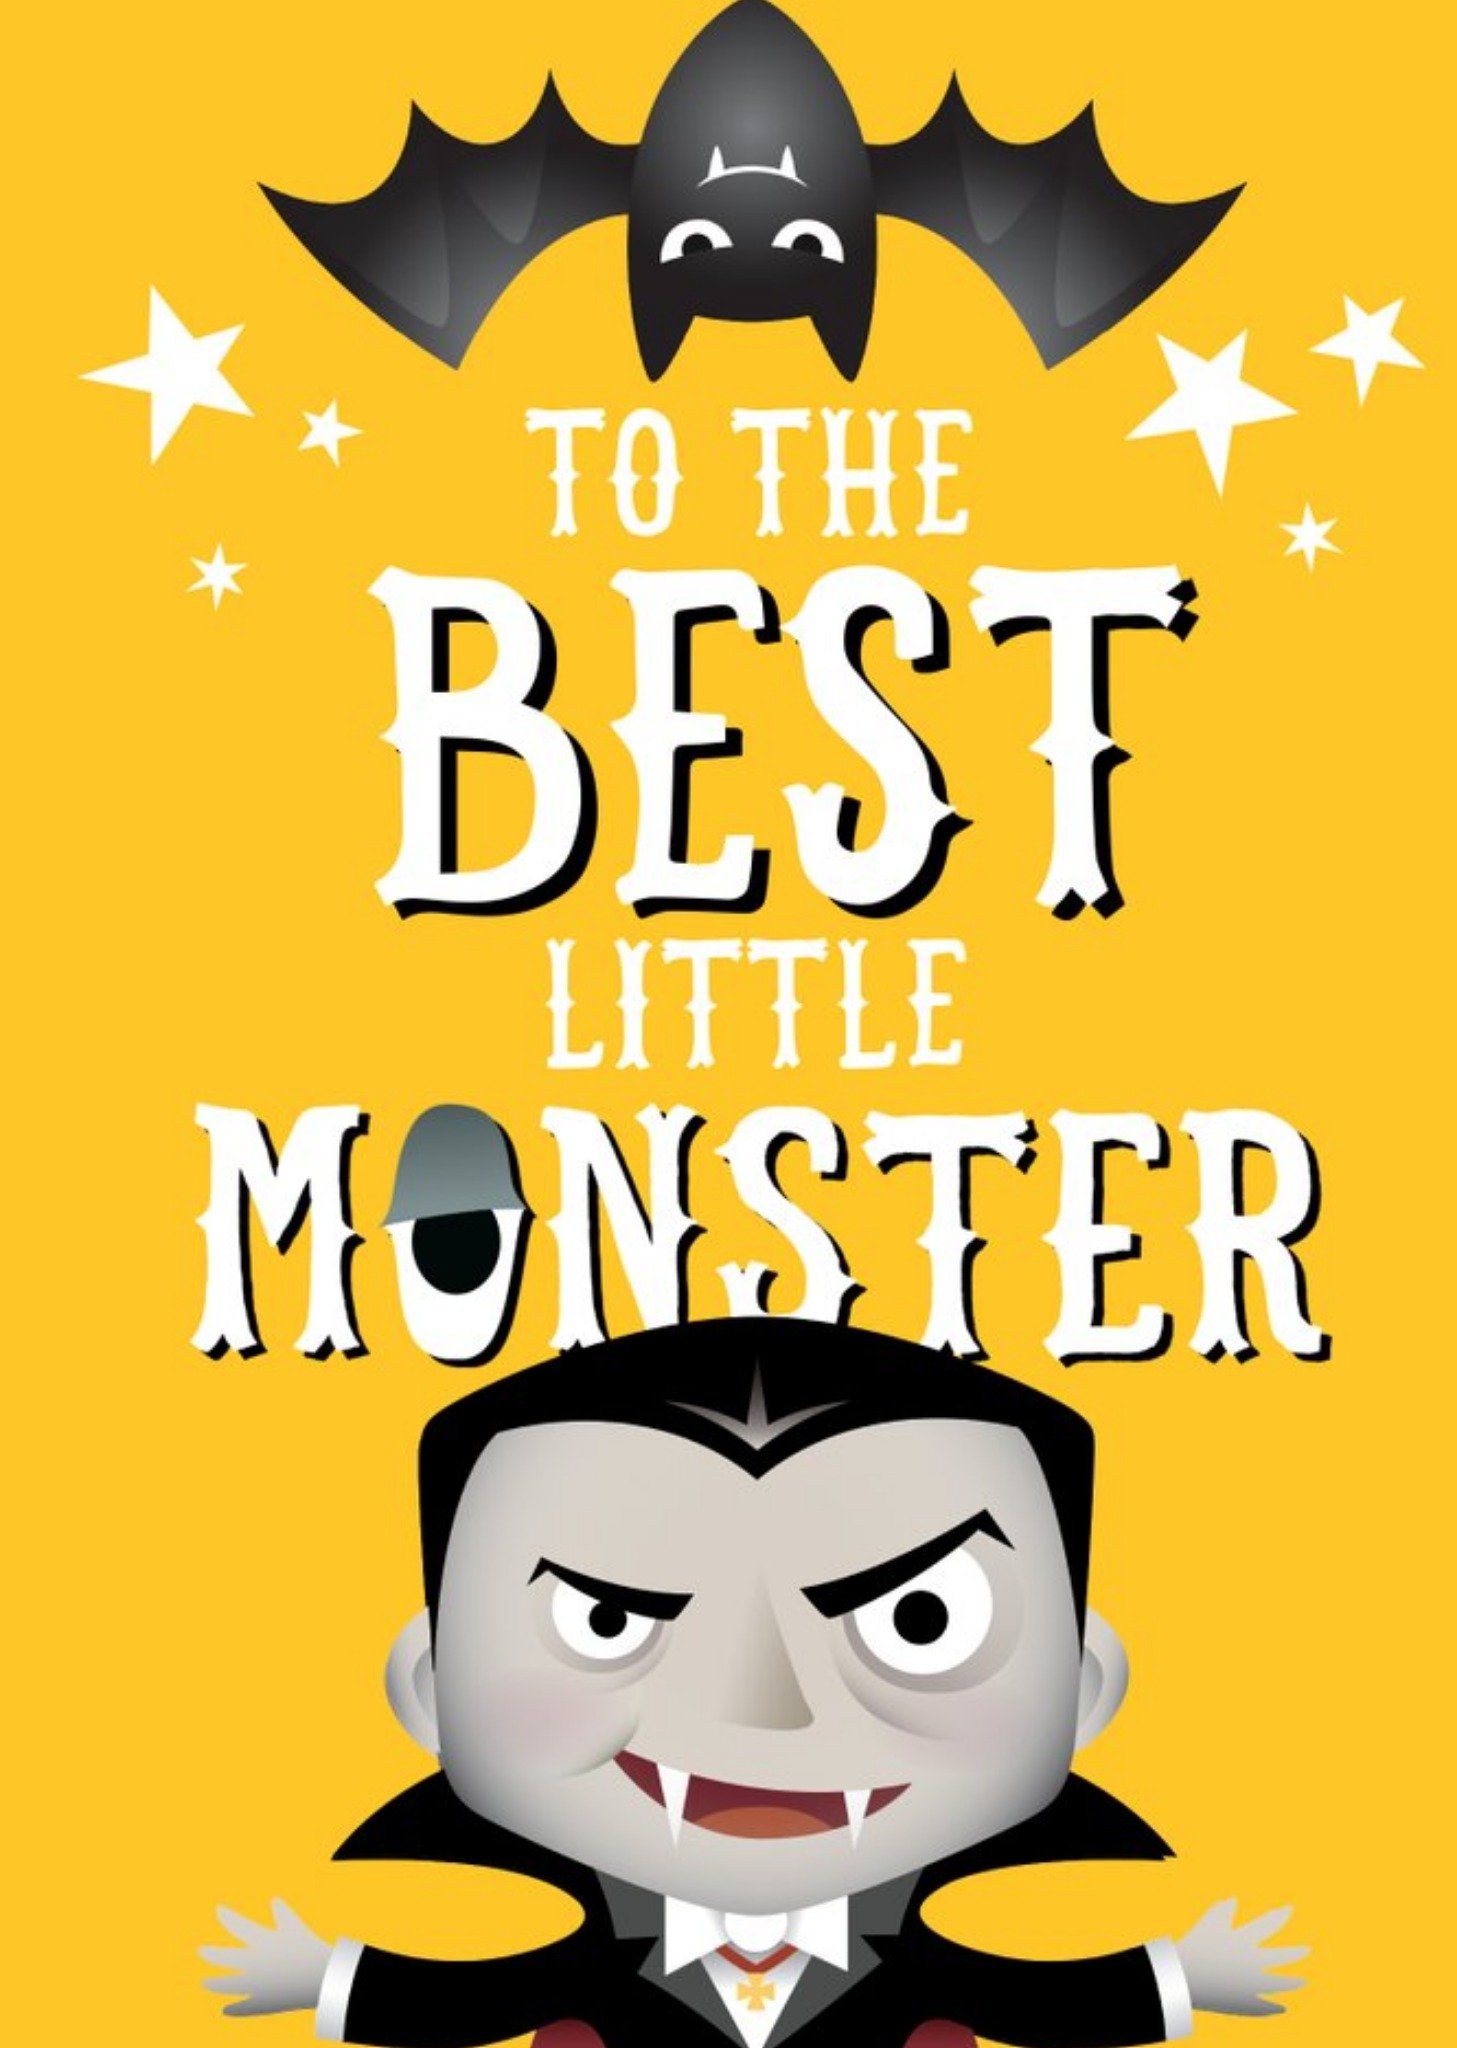 Moonpig Little Monsters Best Little Monster Count Dracula Birthday Card, Large